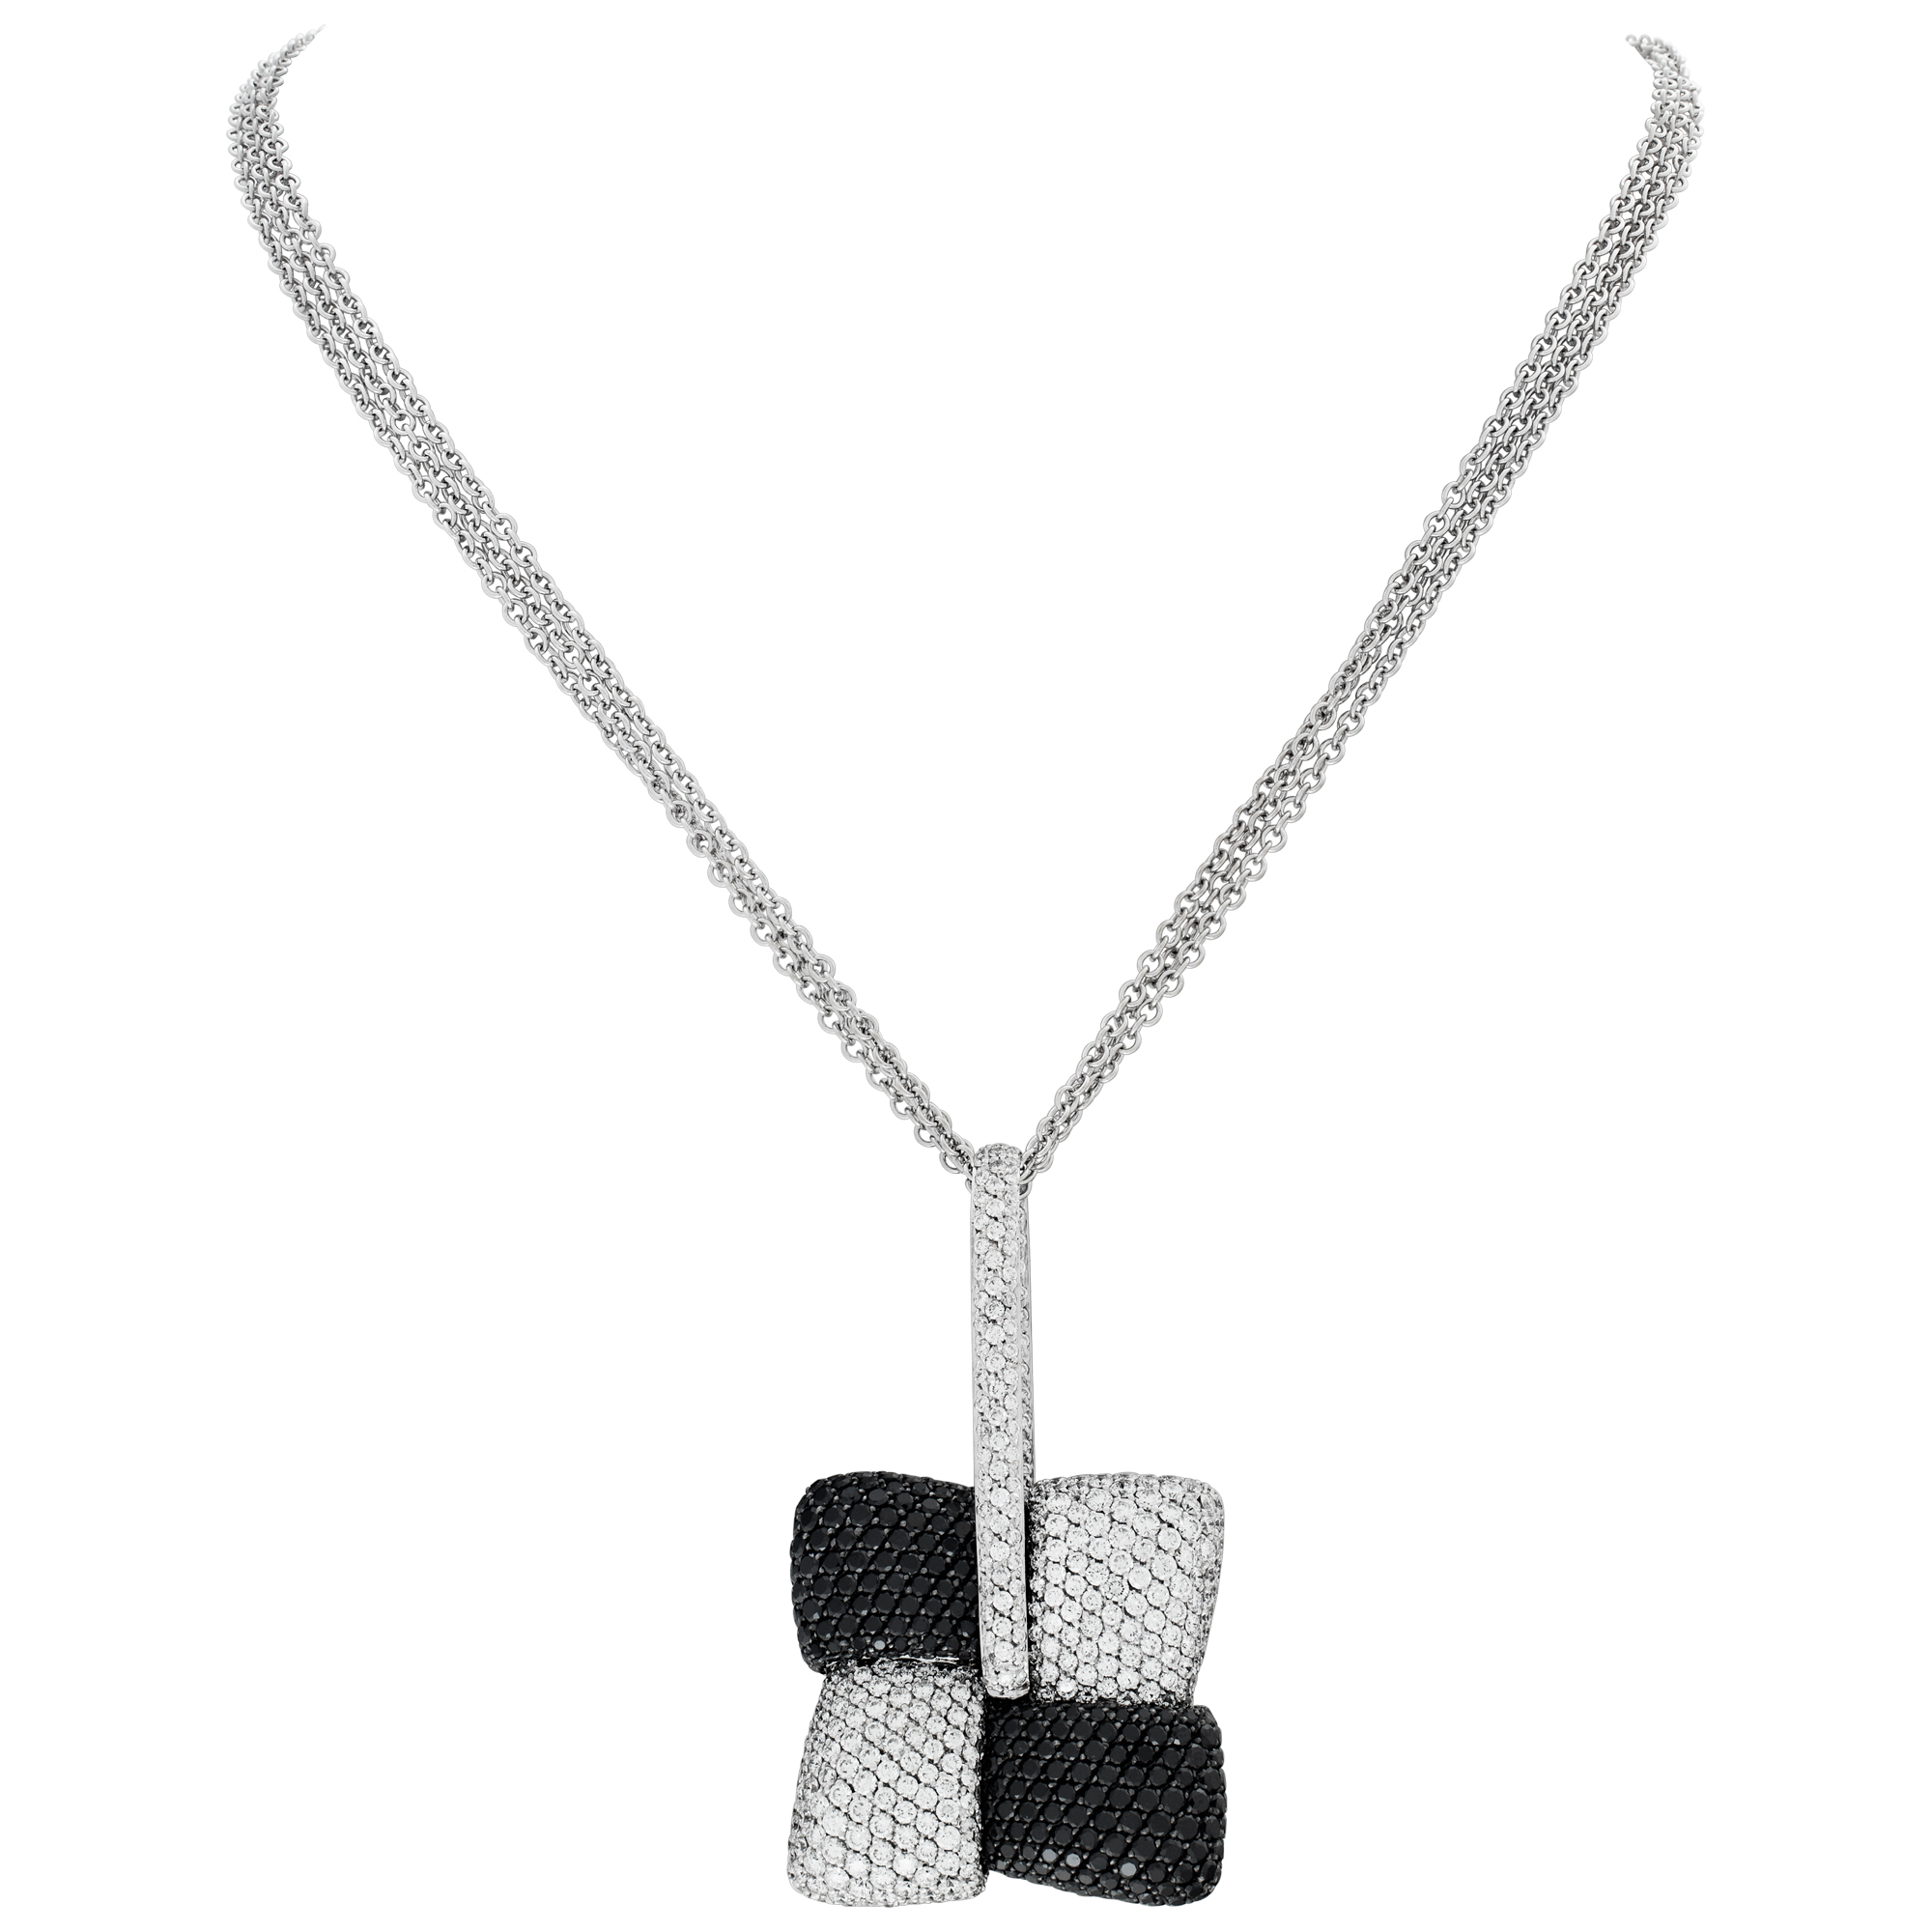 Elegant pave dia pendant + necklace in 18k gold with appx 5 cts white dias and 4.7 cts black dias